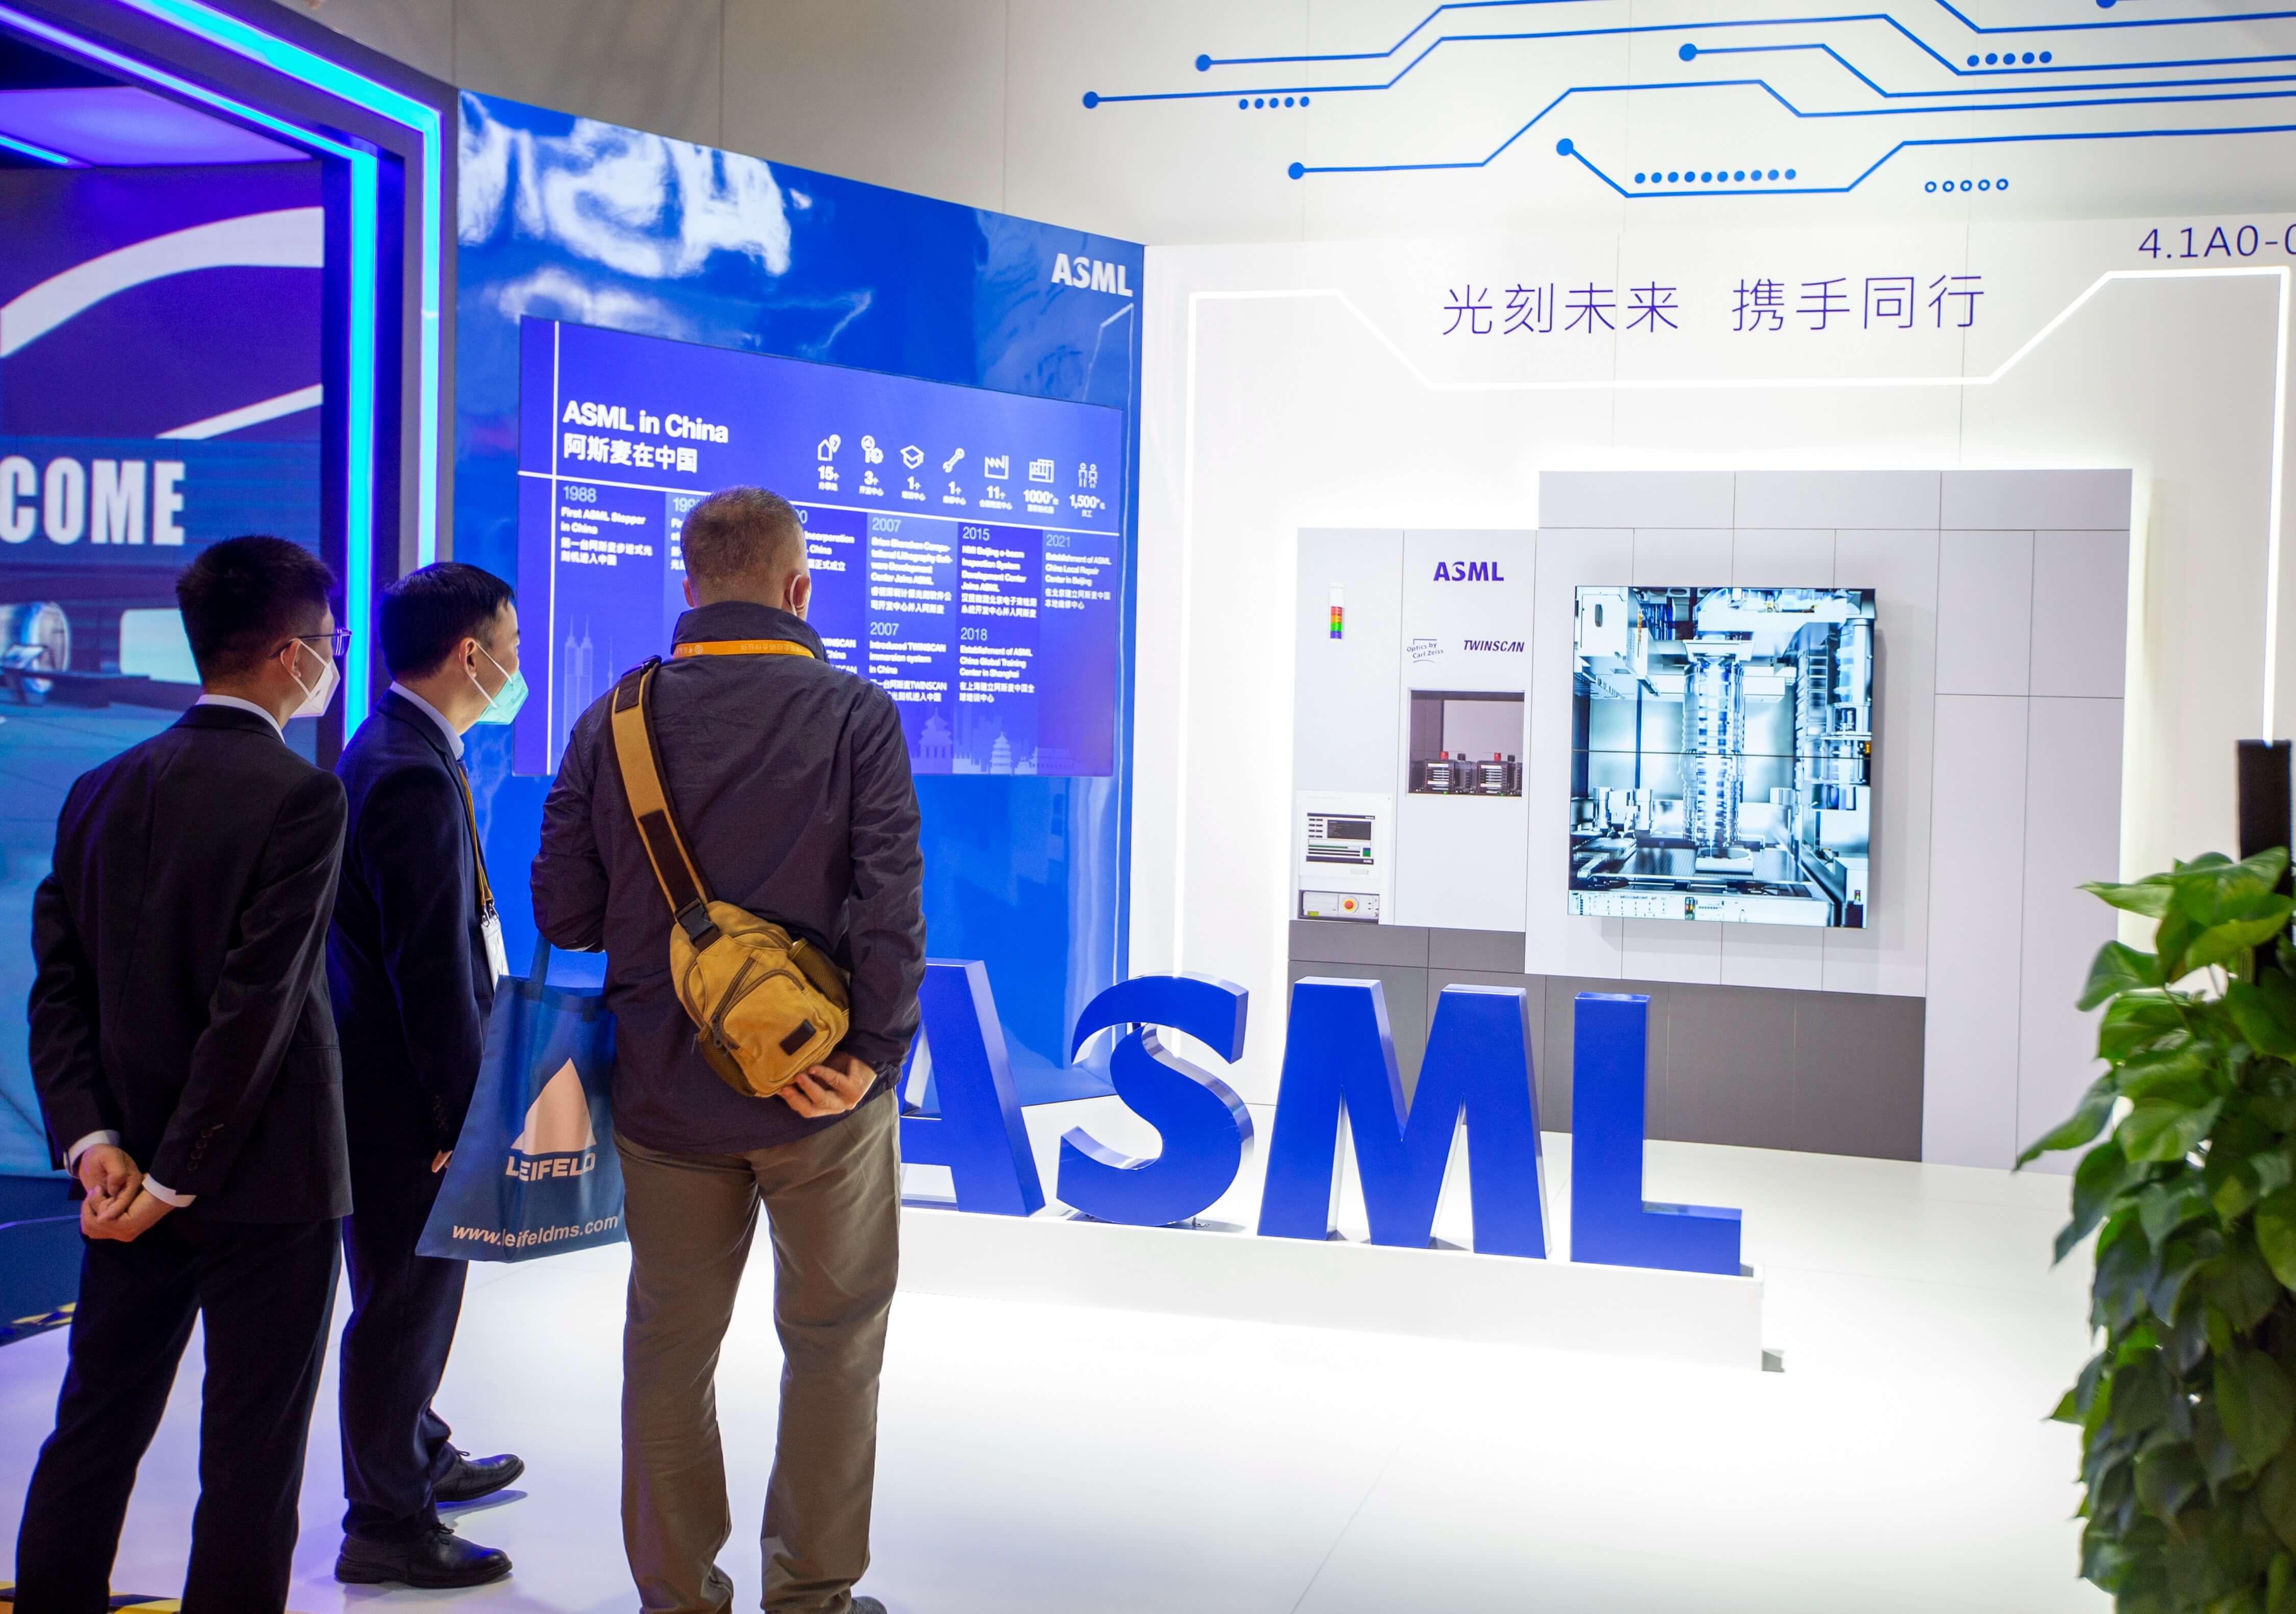 VandeLugtVanderPutten-Visitors learn about lithography machine technology at the ASML exhibition hall during the 5th China International Import Expo in Shanghai, China, November 7, 2022. Reuters